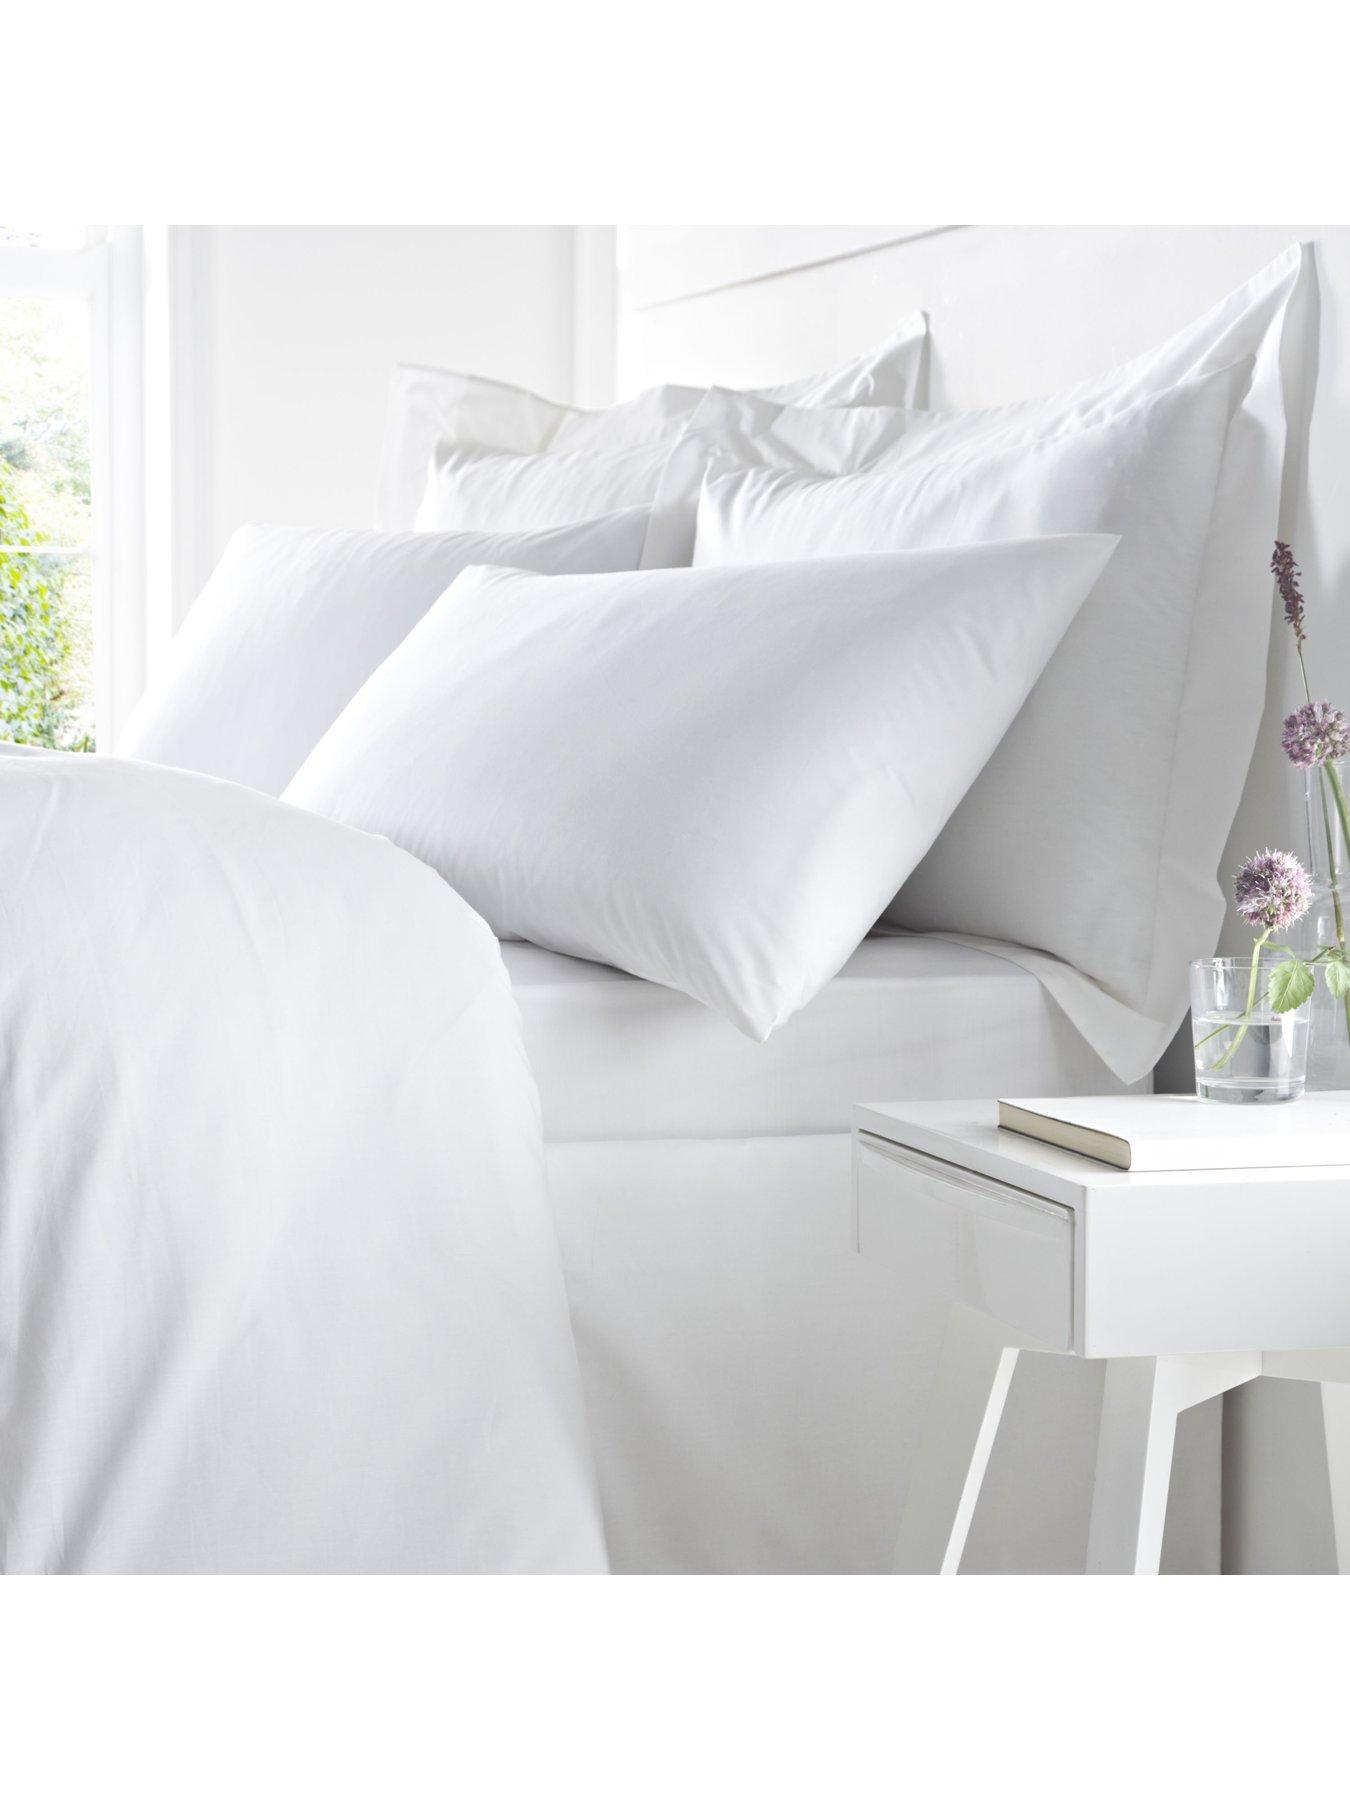 Details about   White Fitted Sheets Extra Deep 16"/40CM Polycotton Kingsize Fitted Bed Sheets 